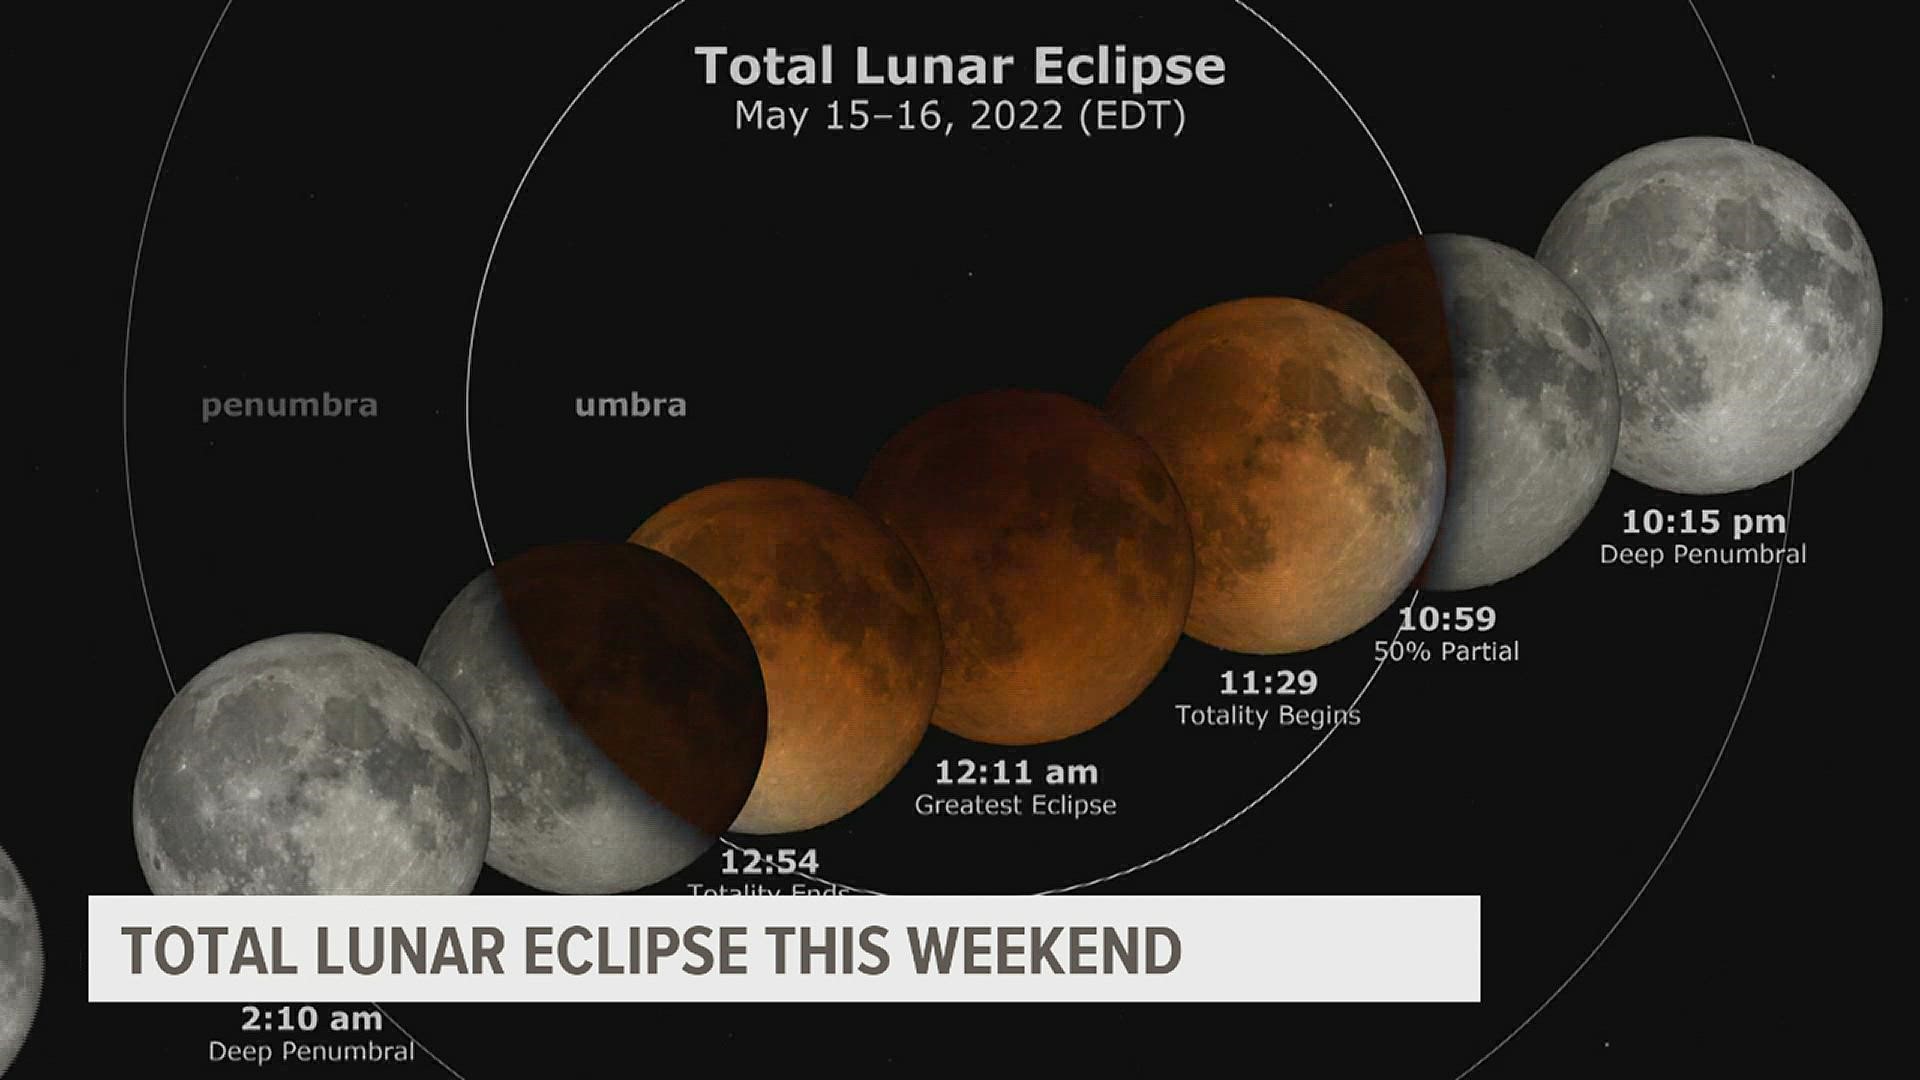 A total lunar eclipse will be visible across North and South America the evening of May 15, according to experts at NASA.